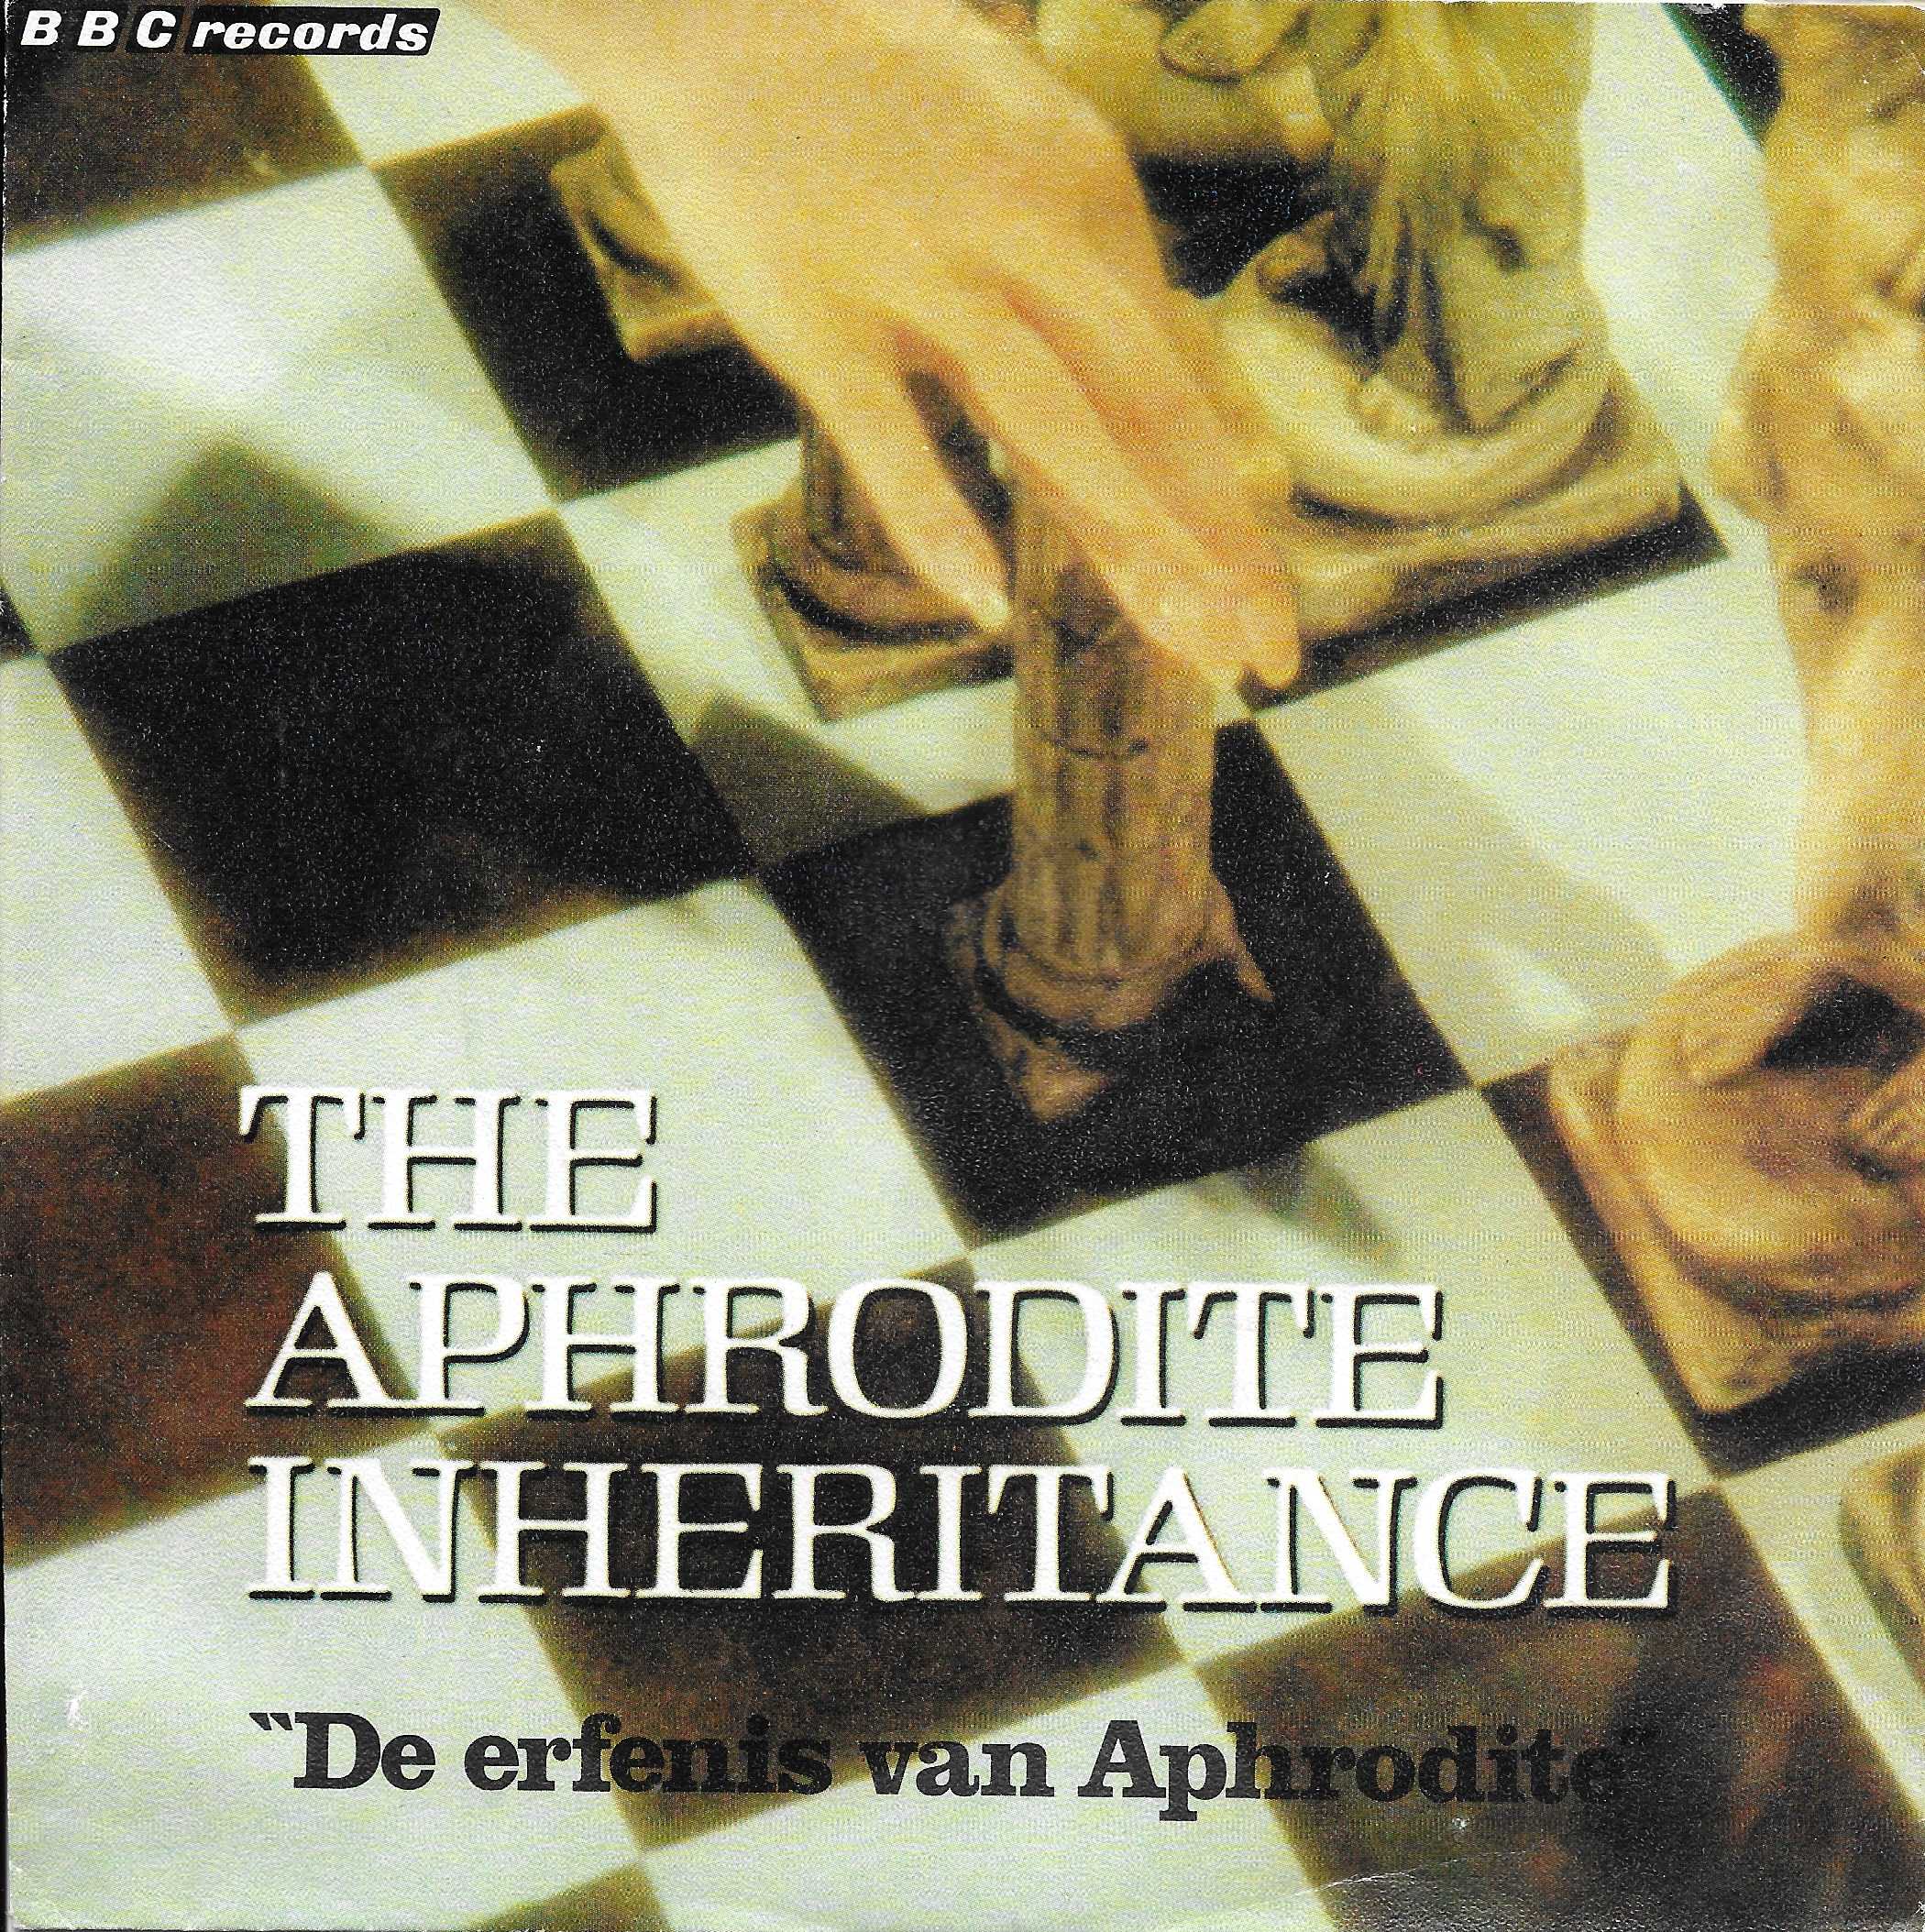 Picture of RESL 62-iD The Aphrodite inheritance (Dutch import) by artist George Kotsonis from the BBC records and Tapes library